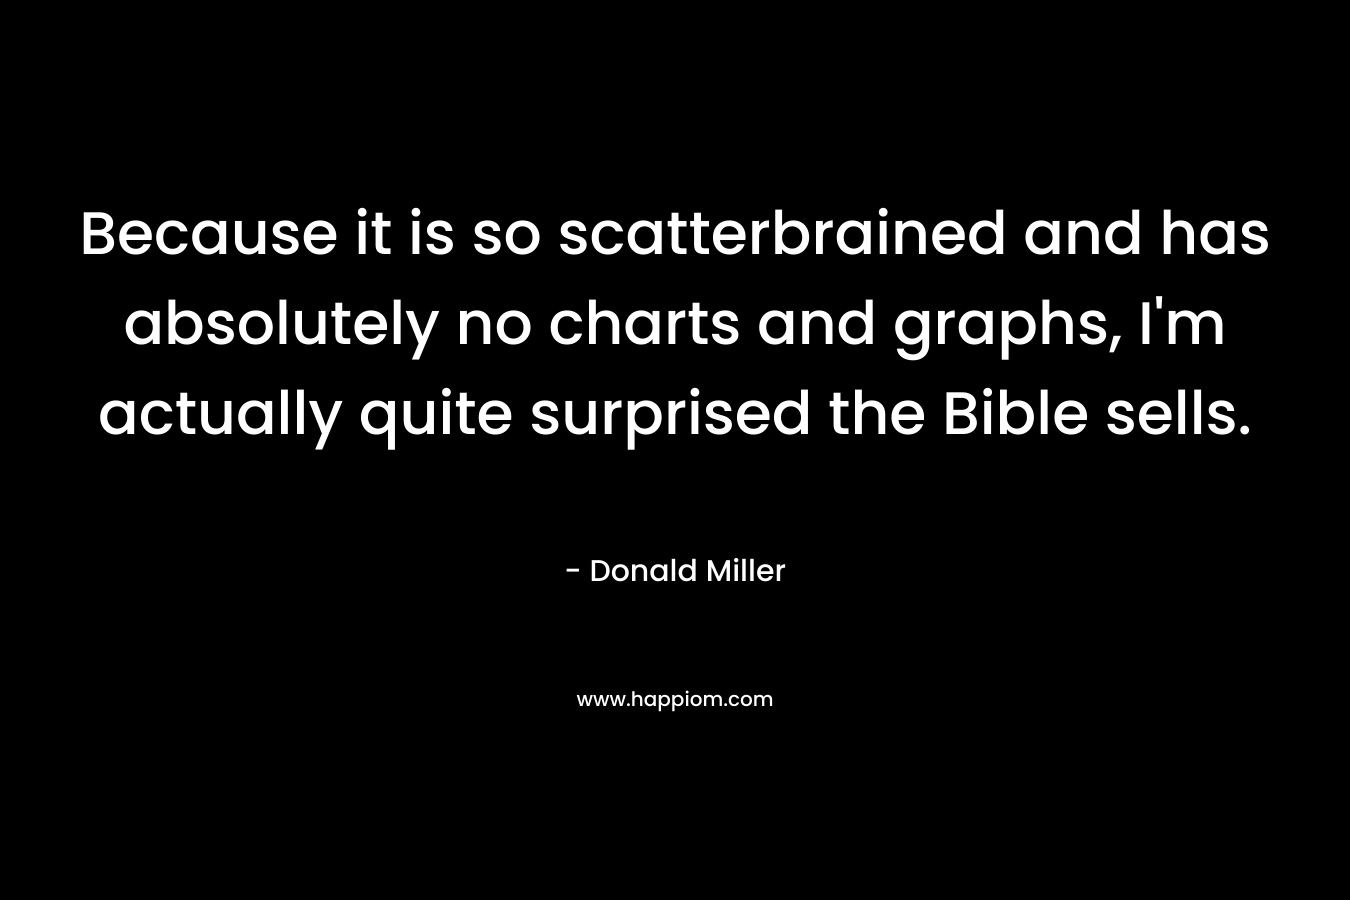 Because it is so scatterbrained and has absolutely no charts and graphs, I’m actually quite surprised the Bible sells. – Donald Miller